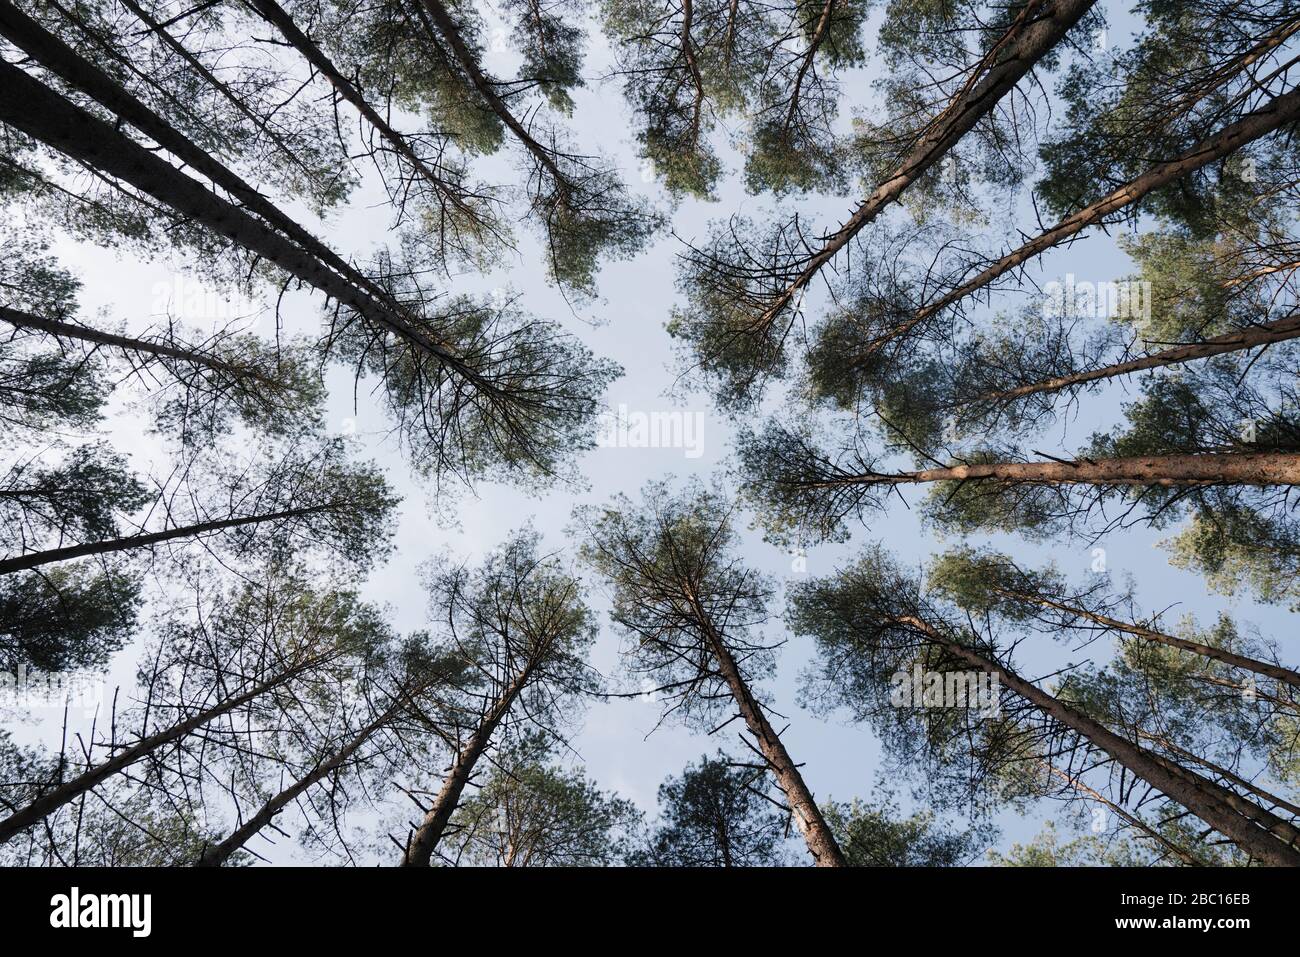 Lithuania, Kernave, Directly below view of forest tree canopies Stock Photo